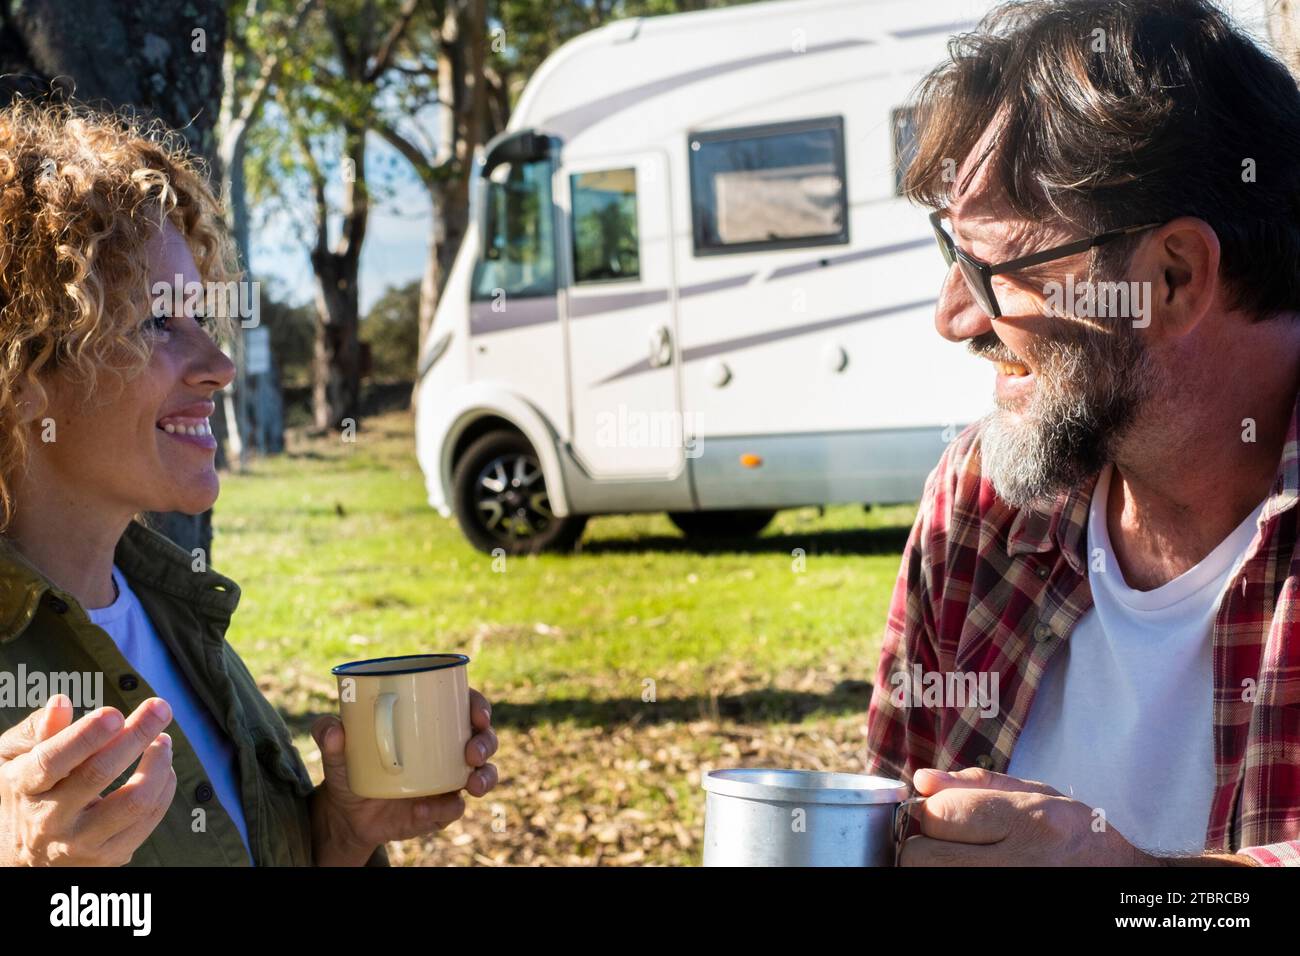 Happy couple of traveler tourist enjoy relax and drinking coffee during travel pause in outdoor at the park with modern rv motorhome vehicle in background under the trees. Autumn journey adventure Stock Photo